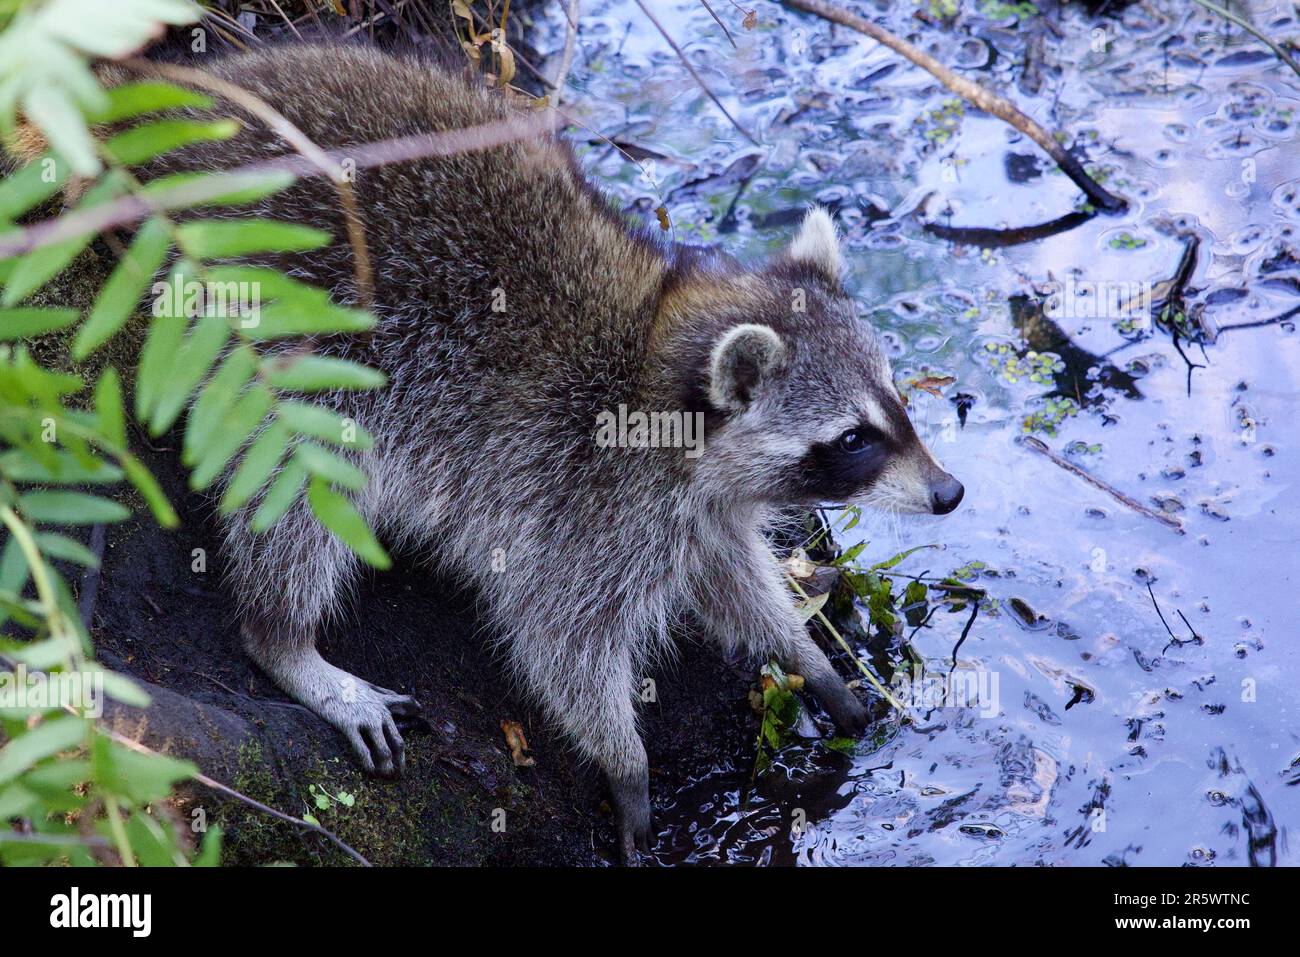 A masked raccoon wading in a shallow body of water, its mouth open as it surveys its surroundings Stock Photo